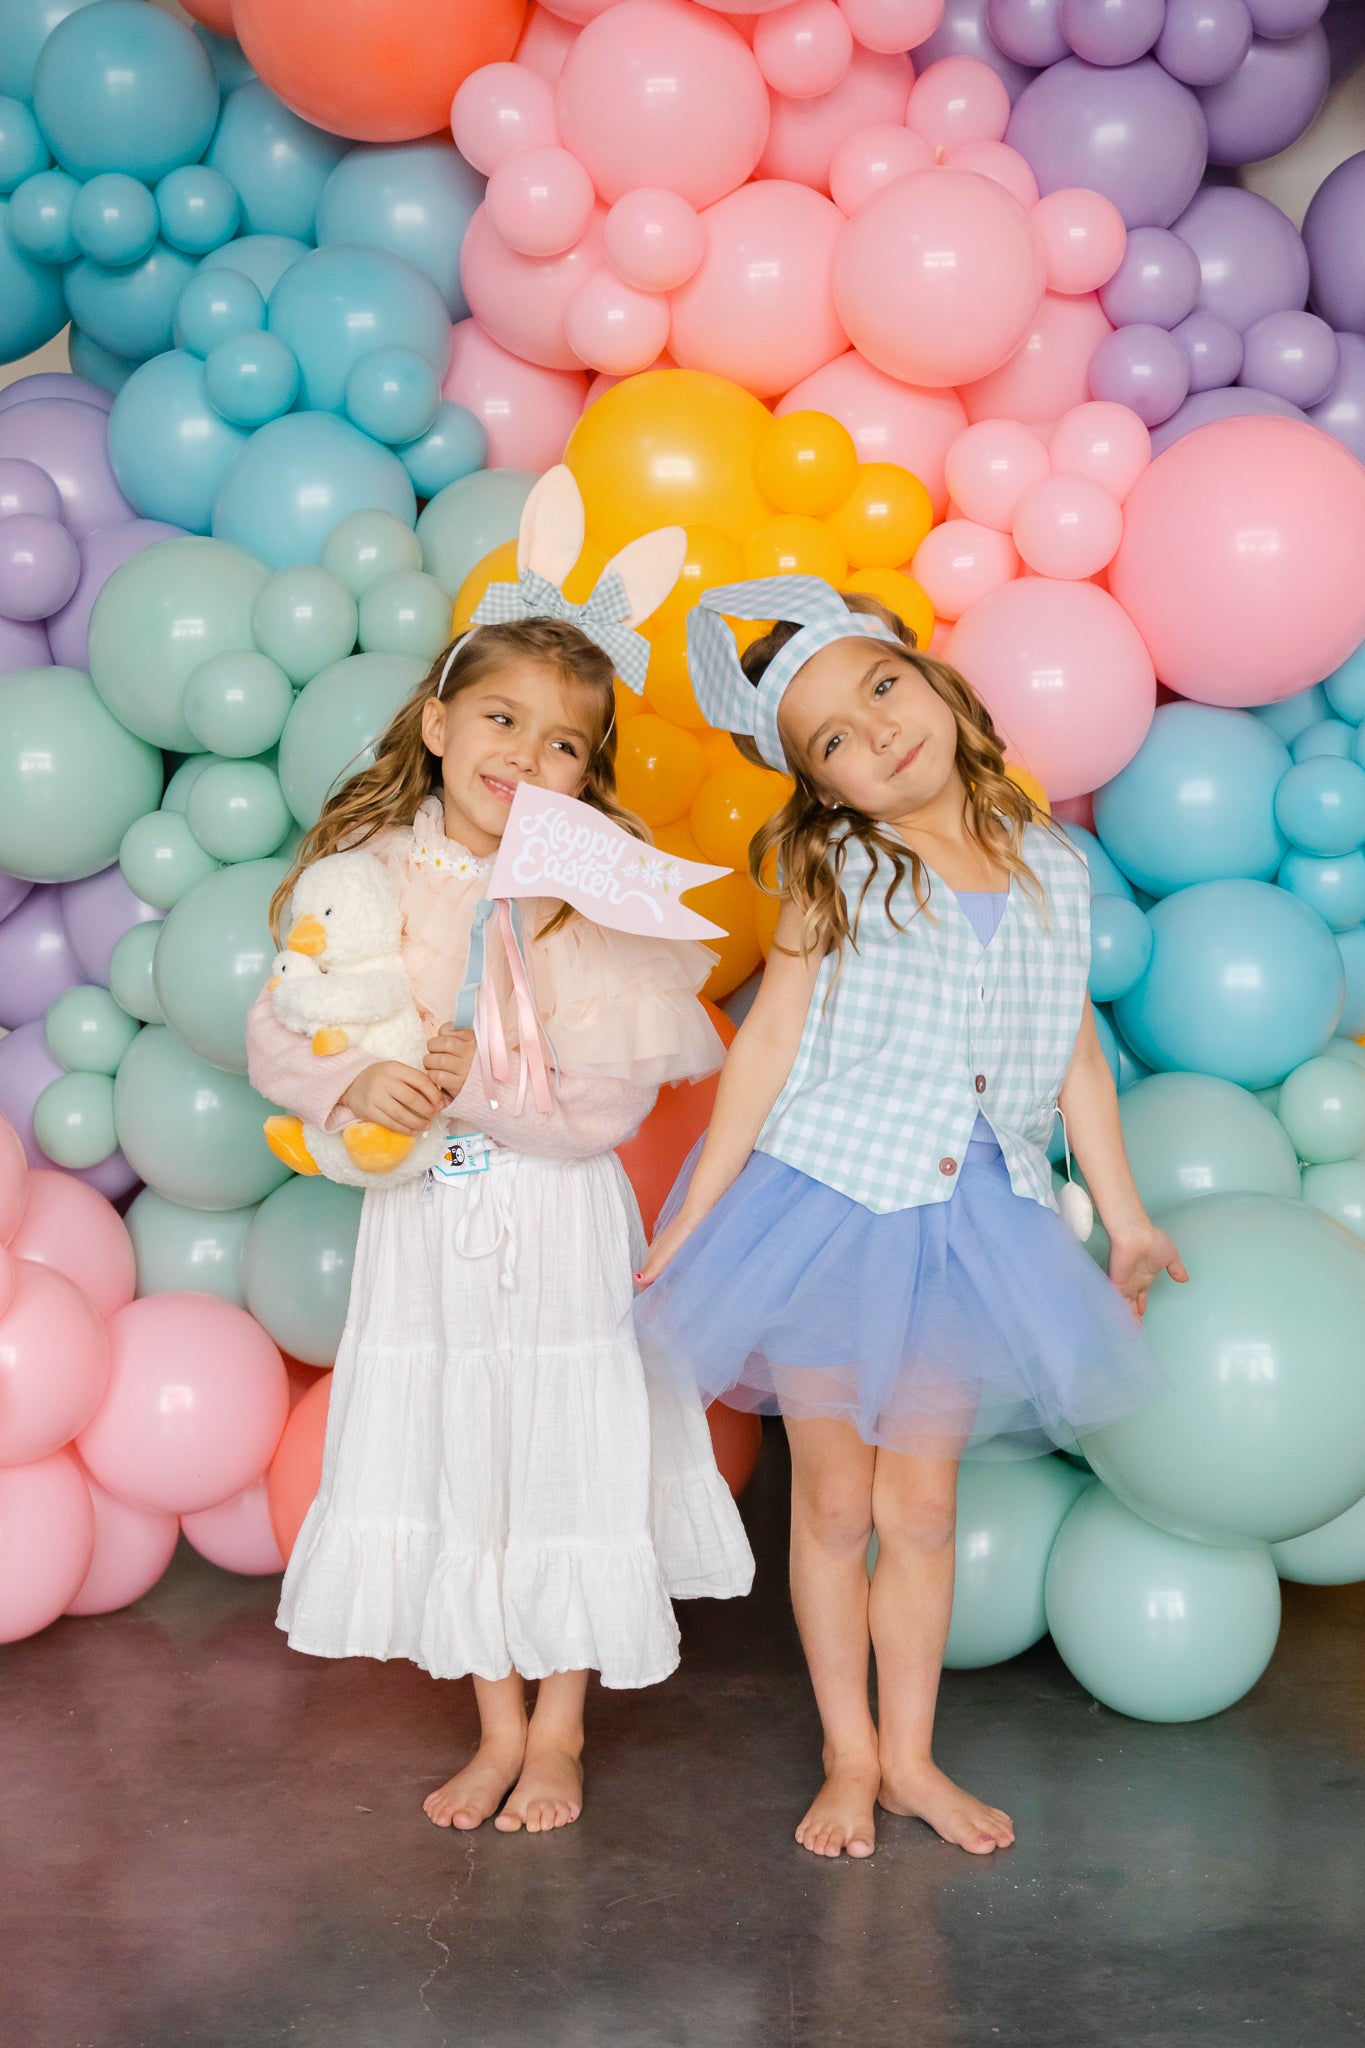 Easter bunny costumes and Easter accessories for kids.